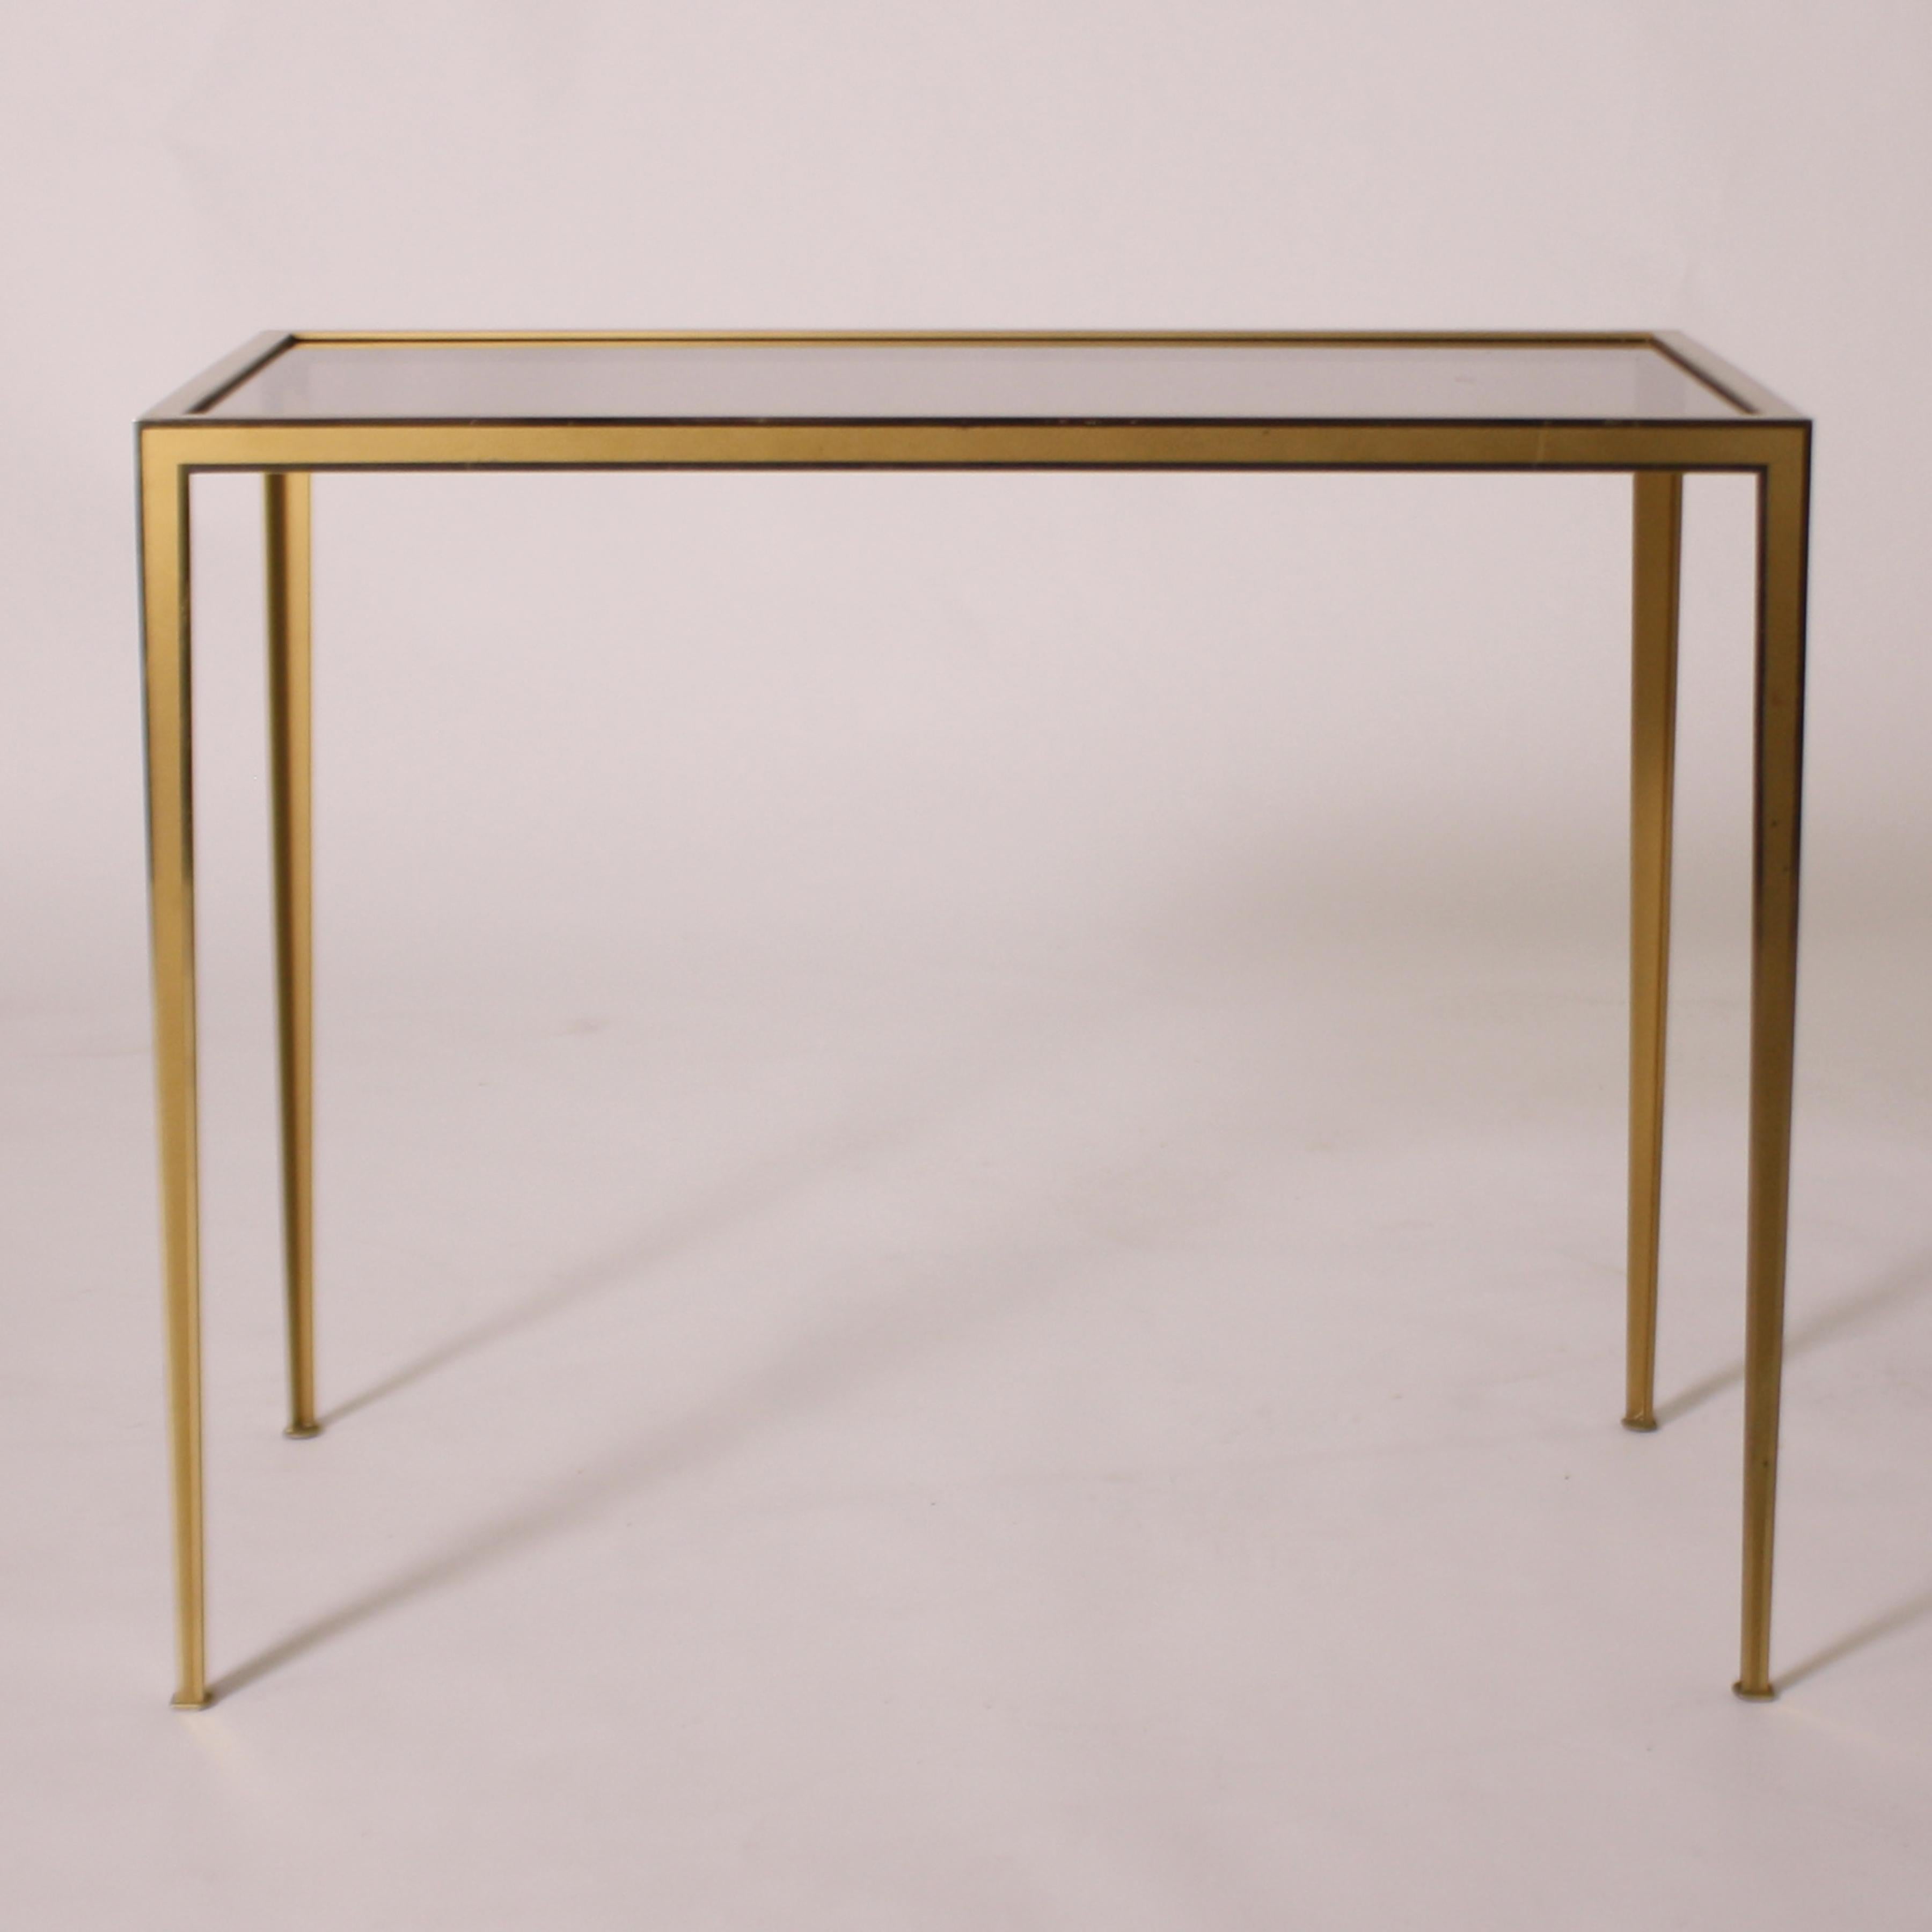 Small brass table with smoked glass top, circa 1950.